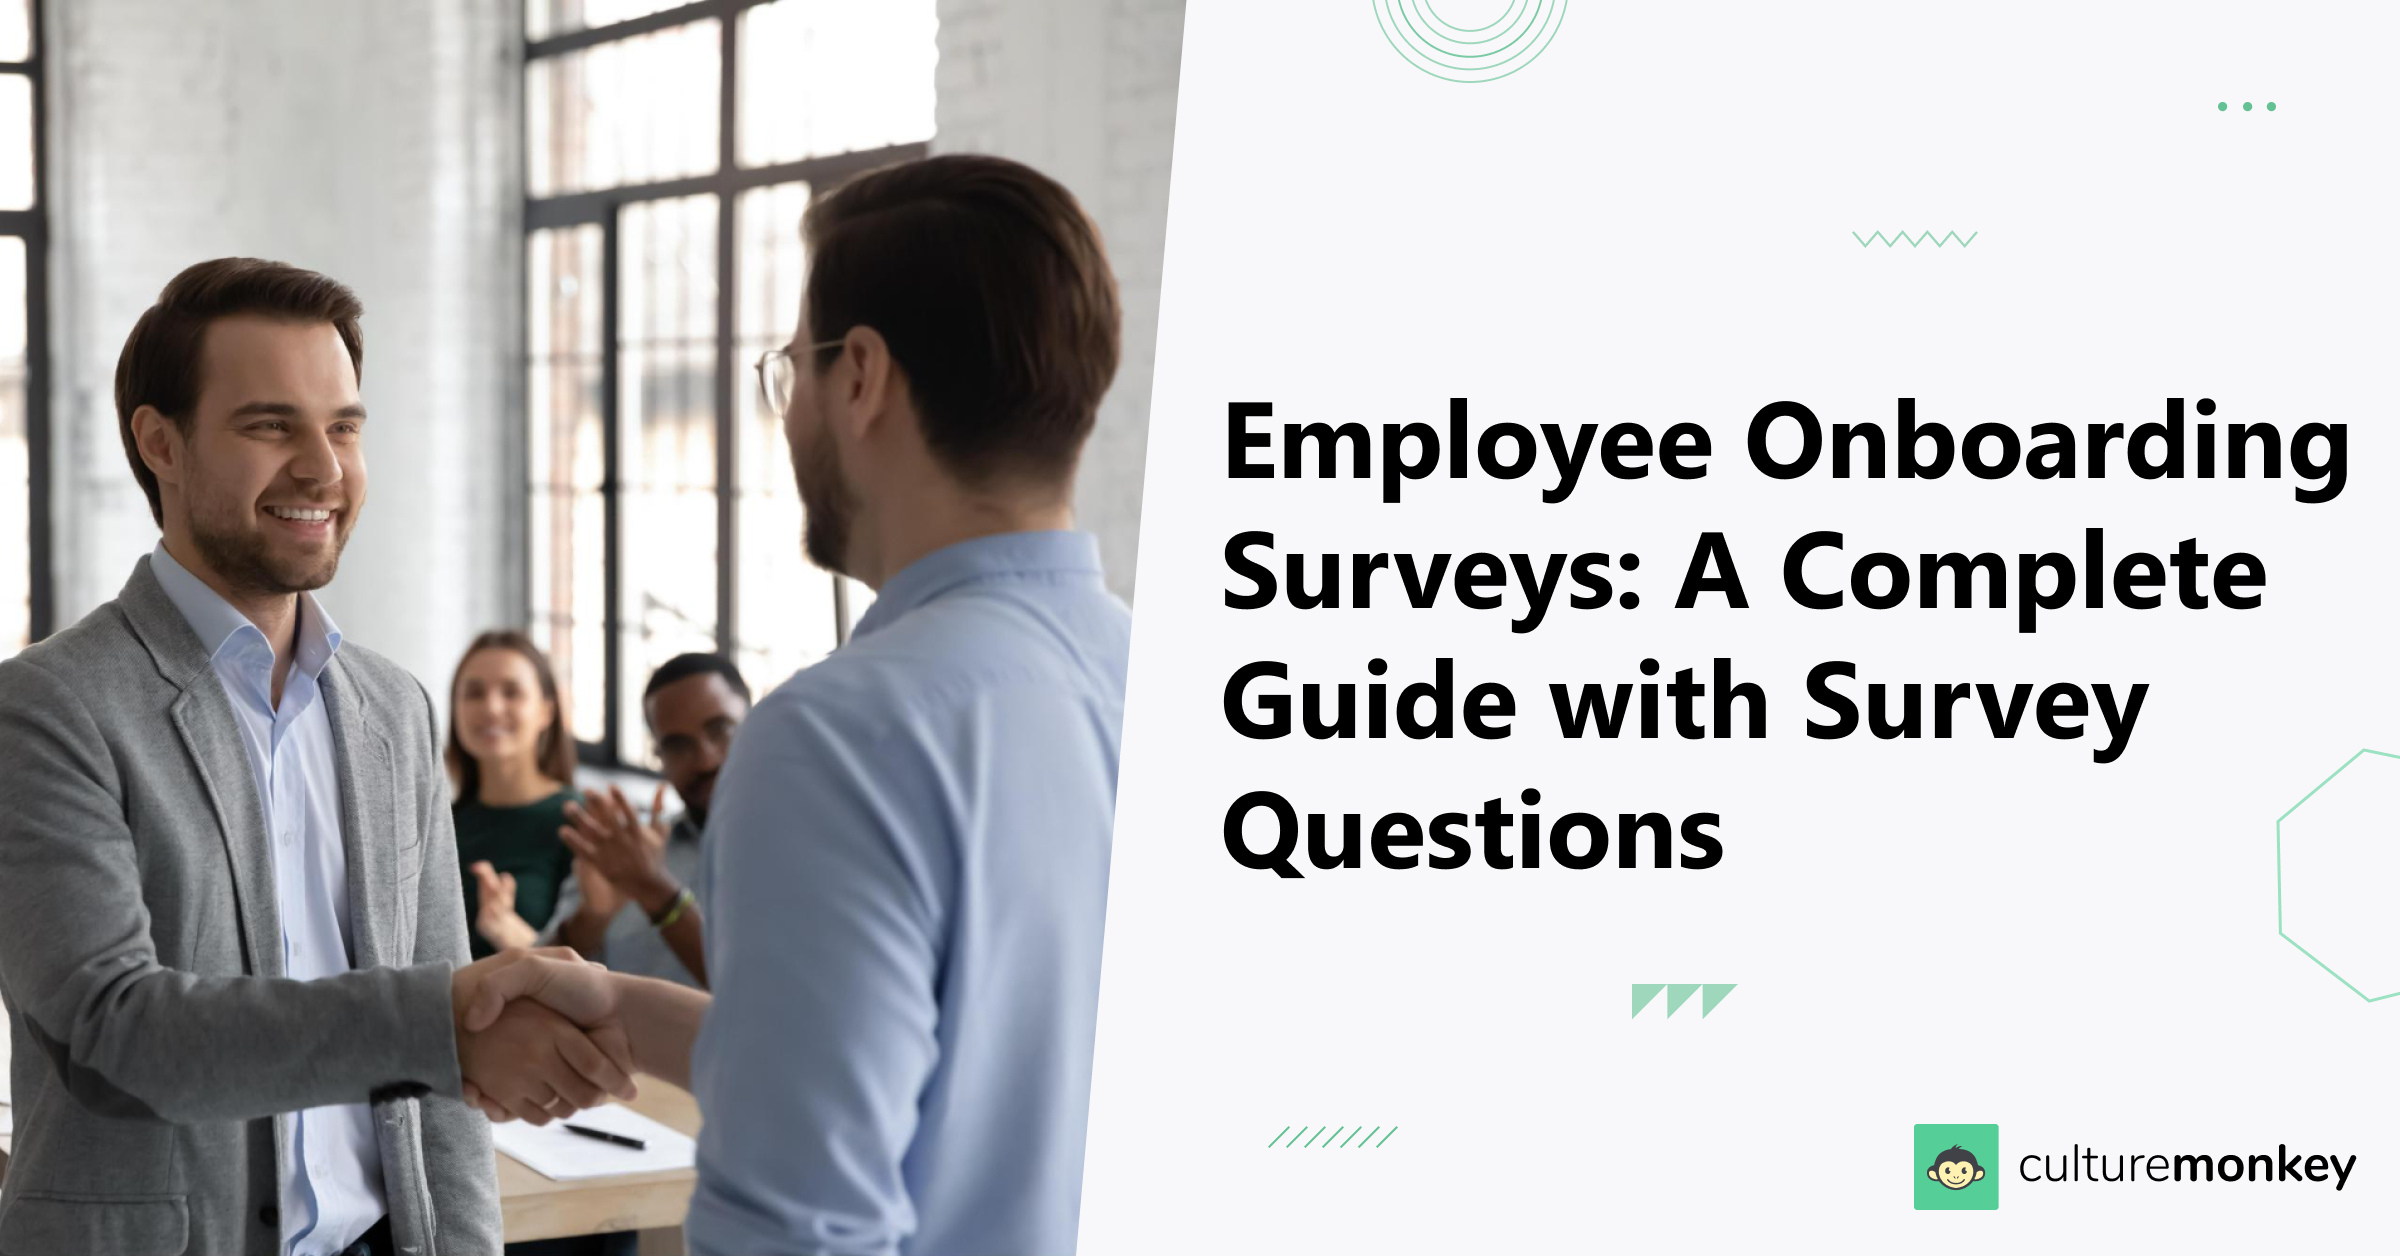 Employee Onboarding Surveys: A Complete Guide with Survey Questions